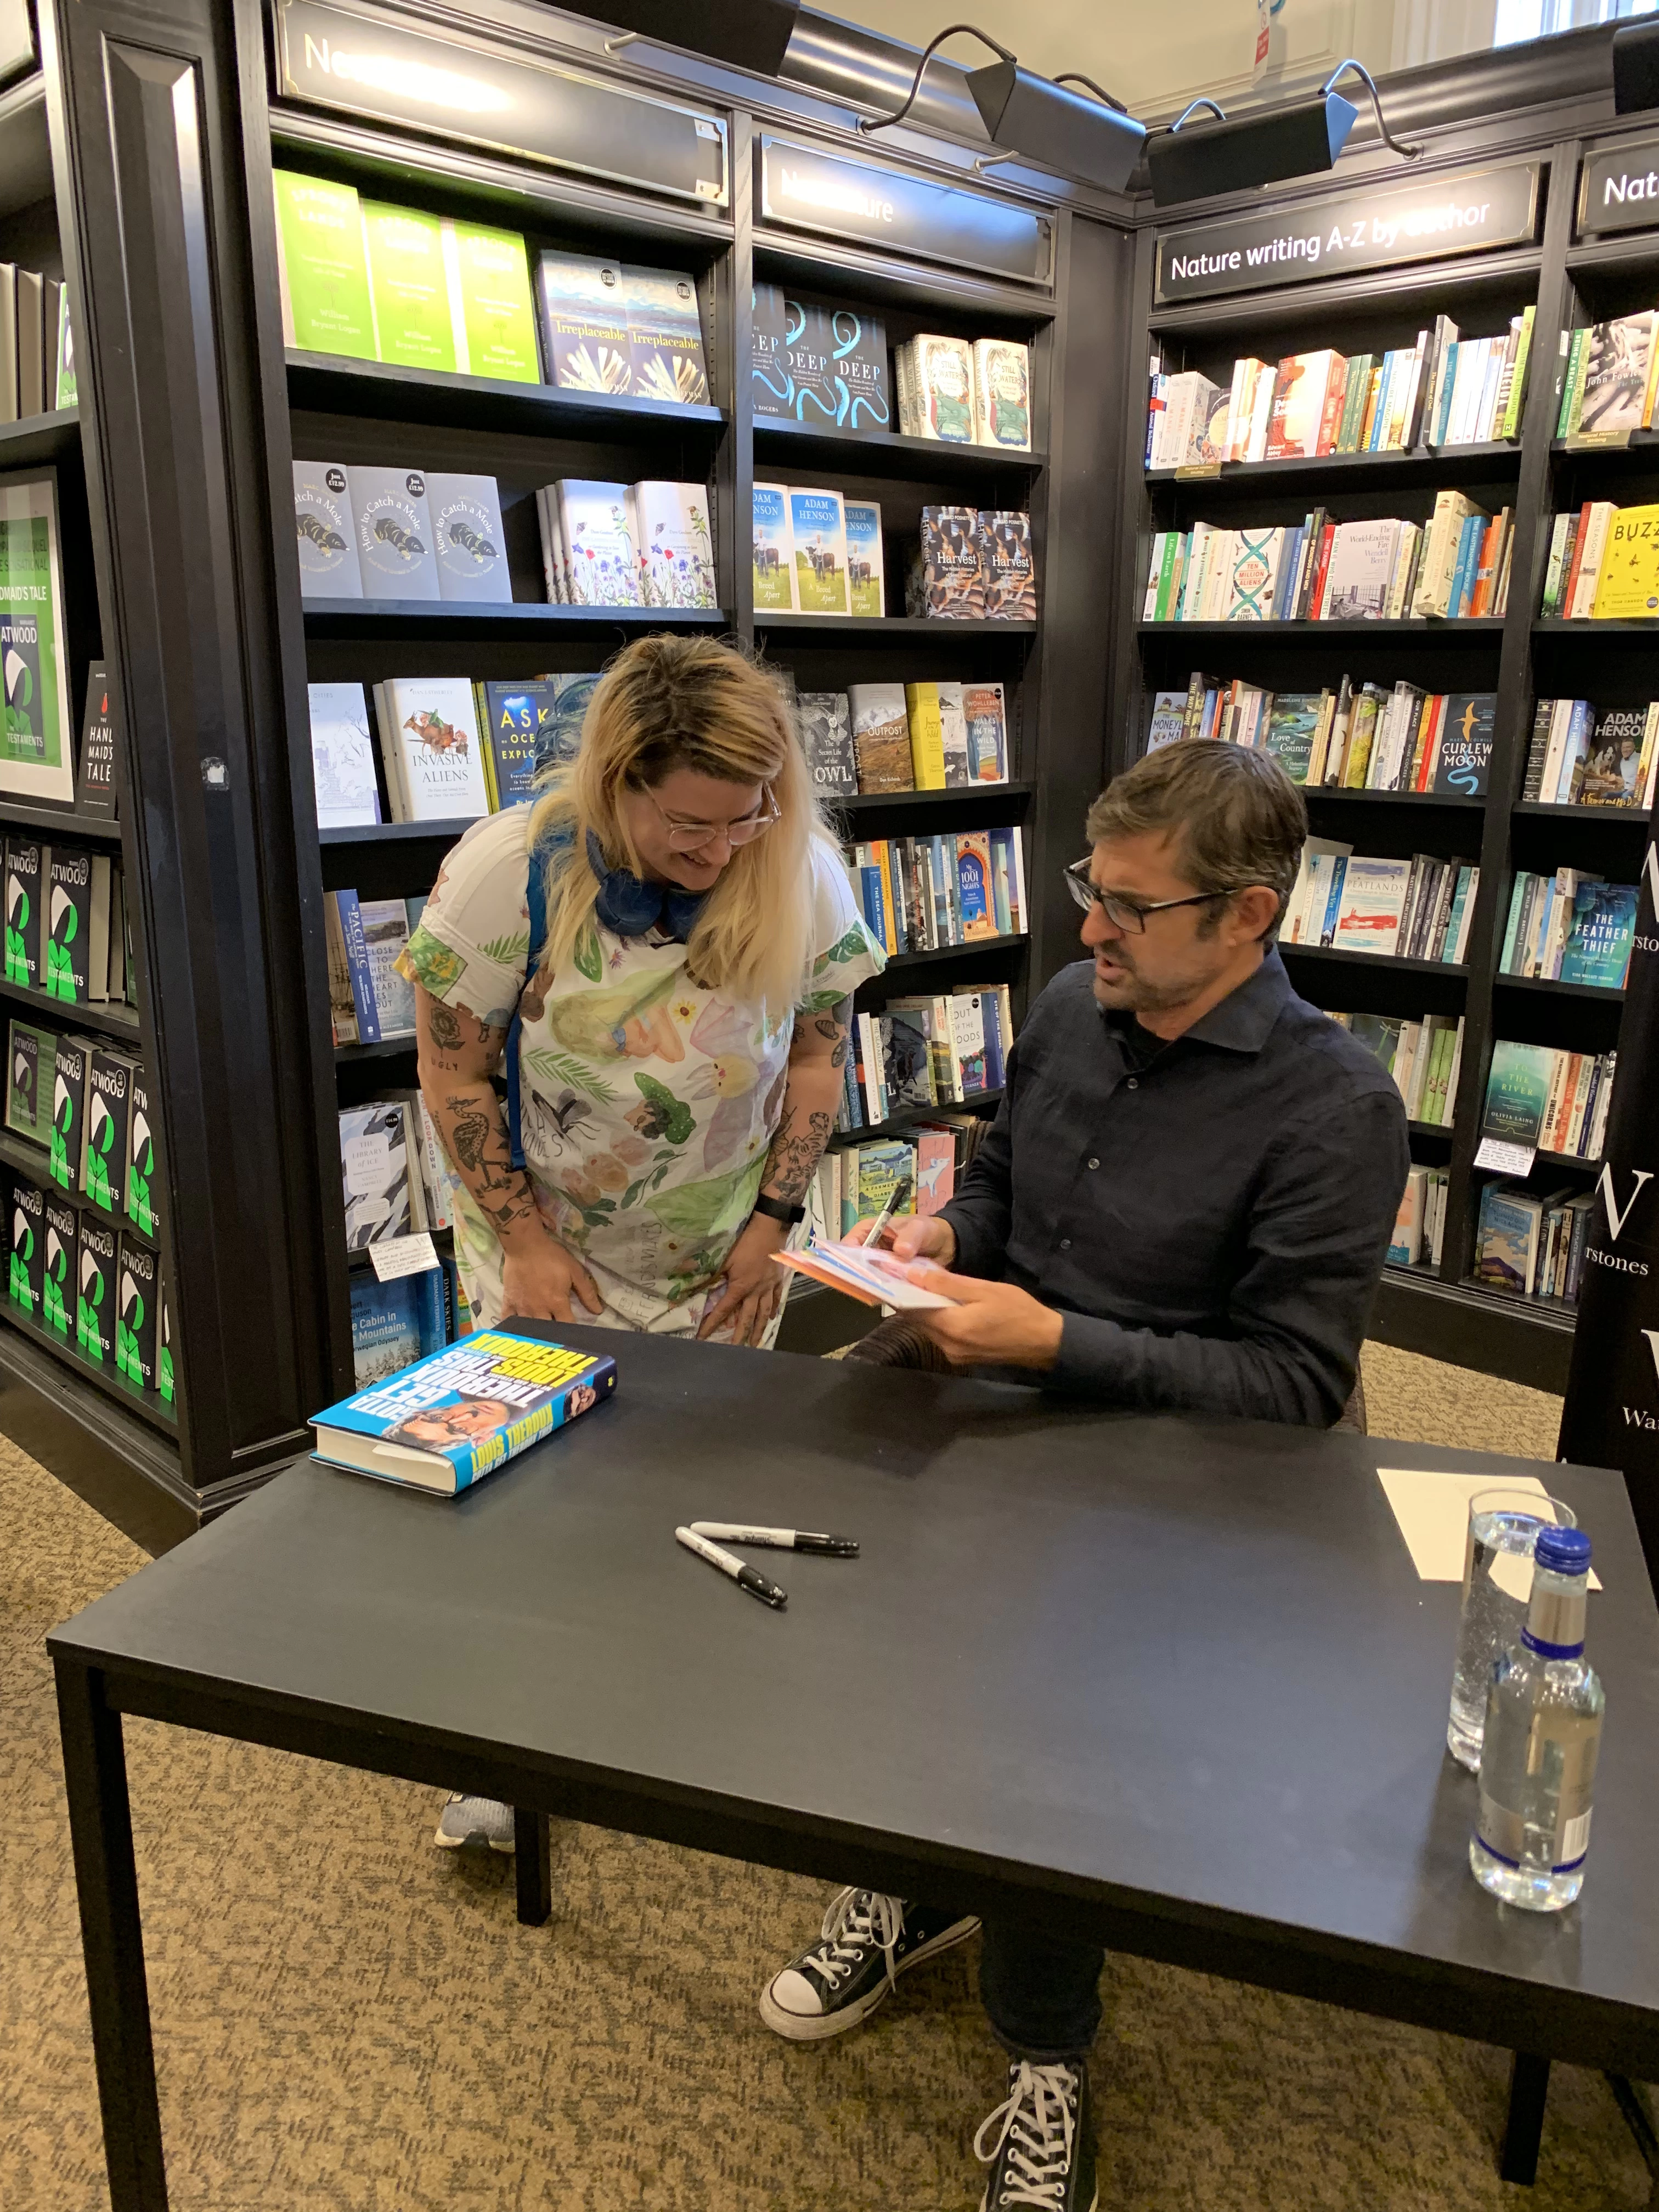 Nicola Fernandes known as Fernandes Makes meeting legend Louis Theroux at a book signing handing over some greeting cards she designed with his face on wearing a dress Nicola handmade with her designs 